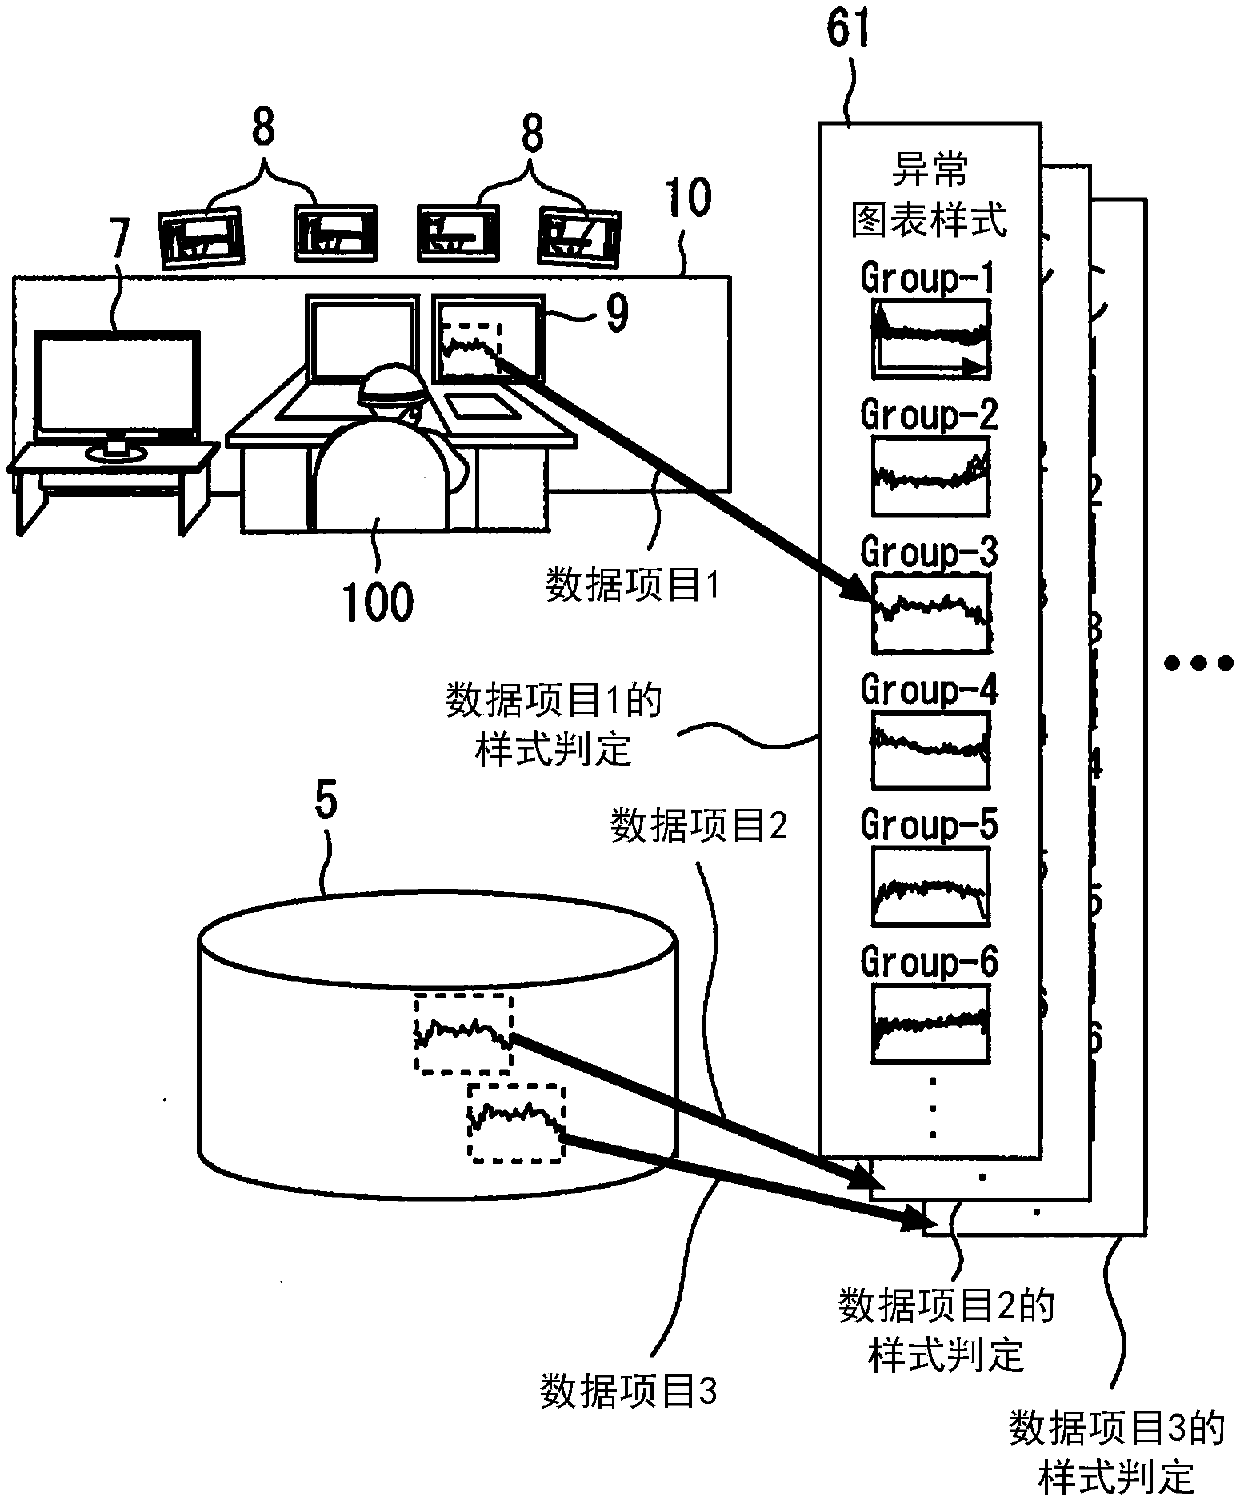 Monitoring work support system for an iron and steel plant